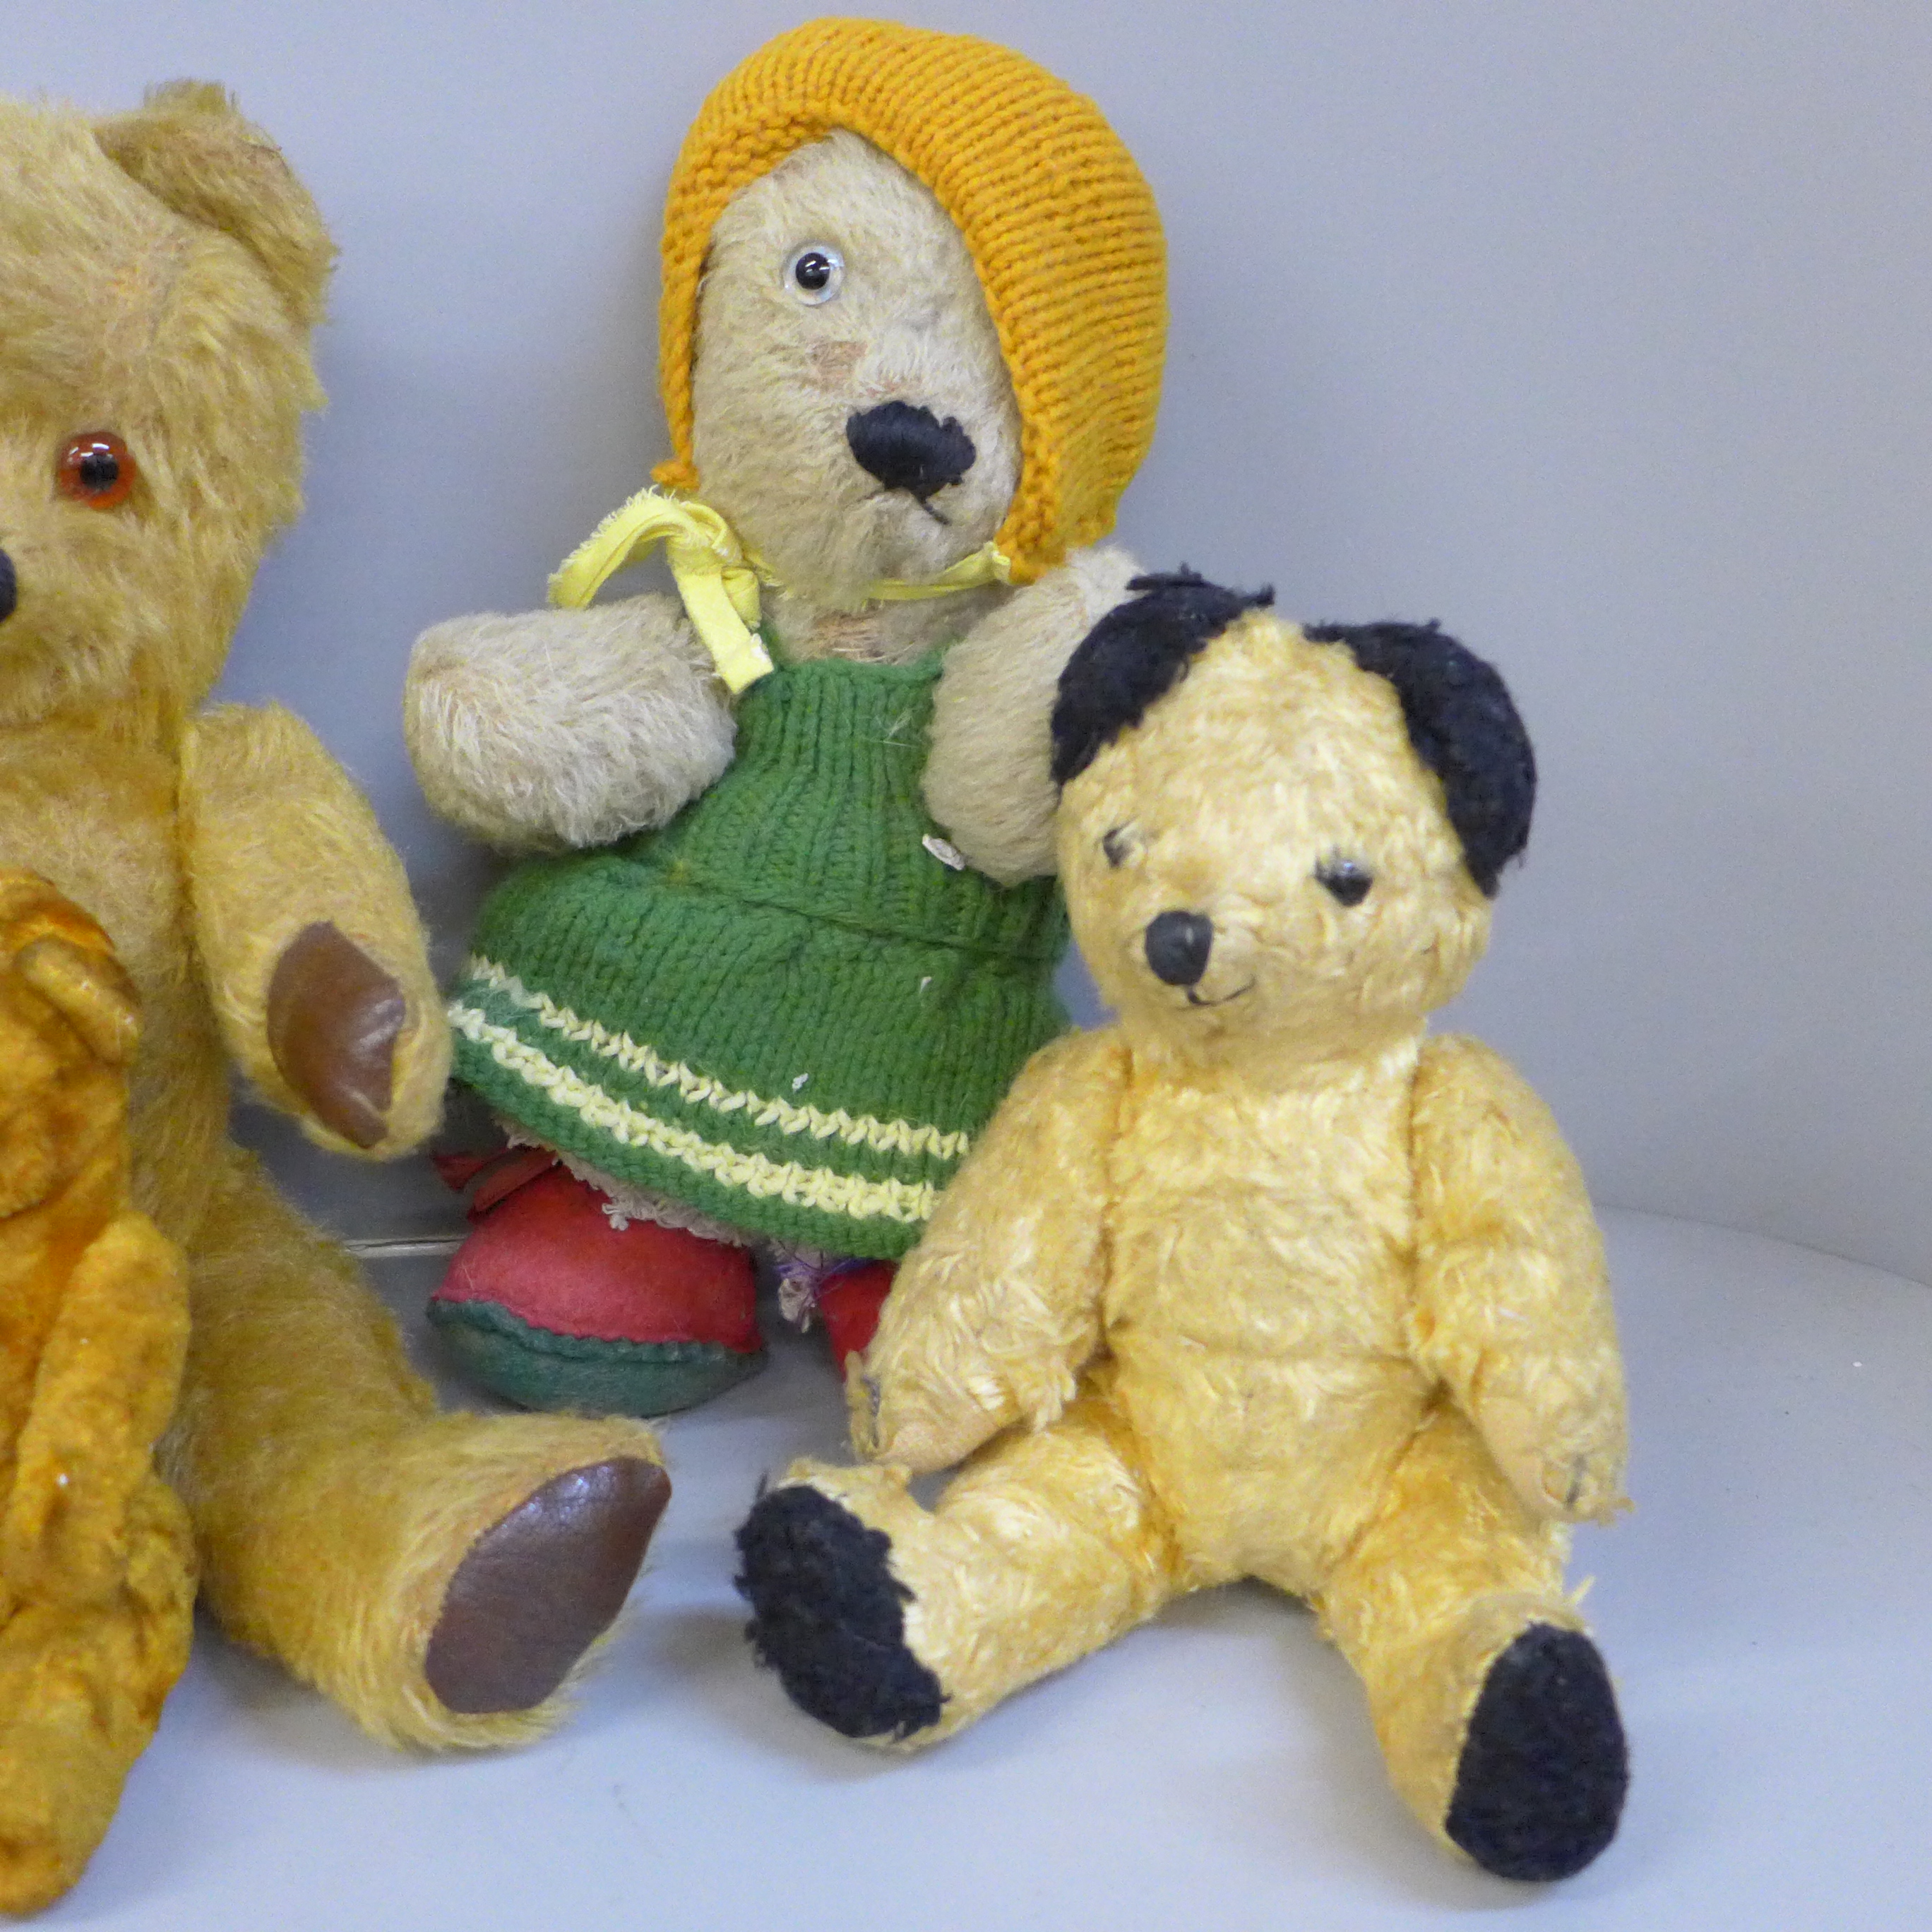 Seven vintage Teddy bears including one musical - Image 4 of 5